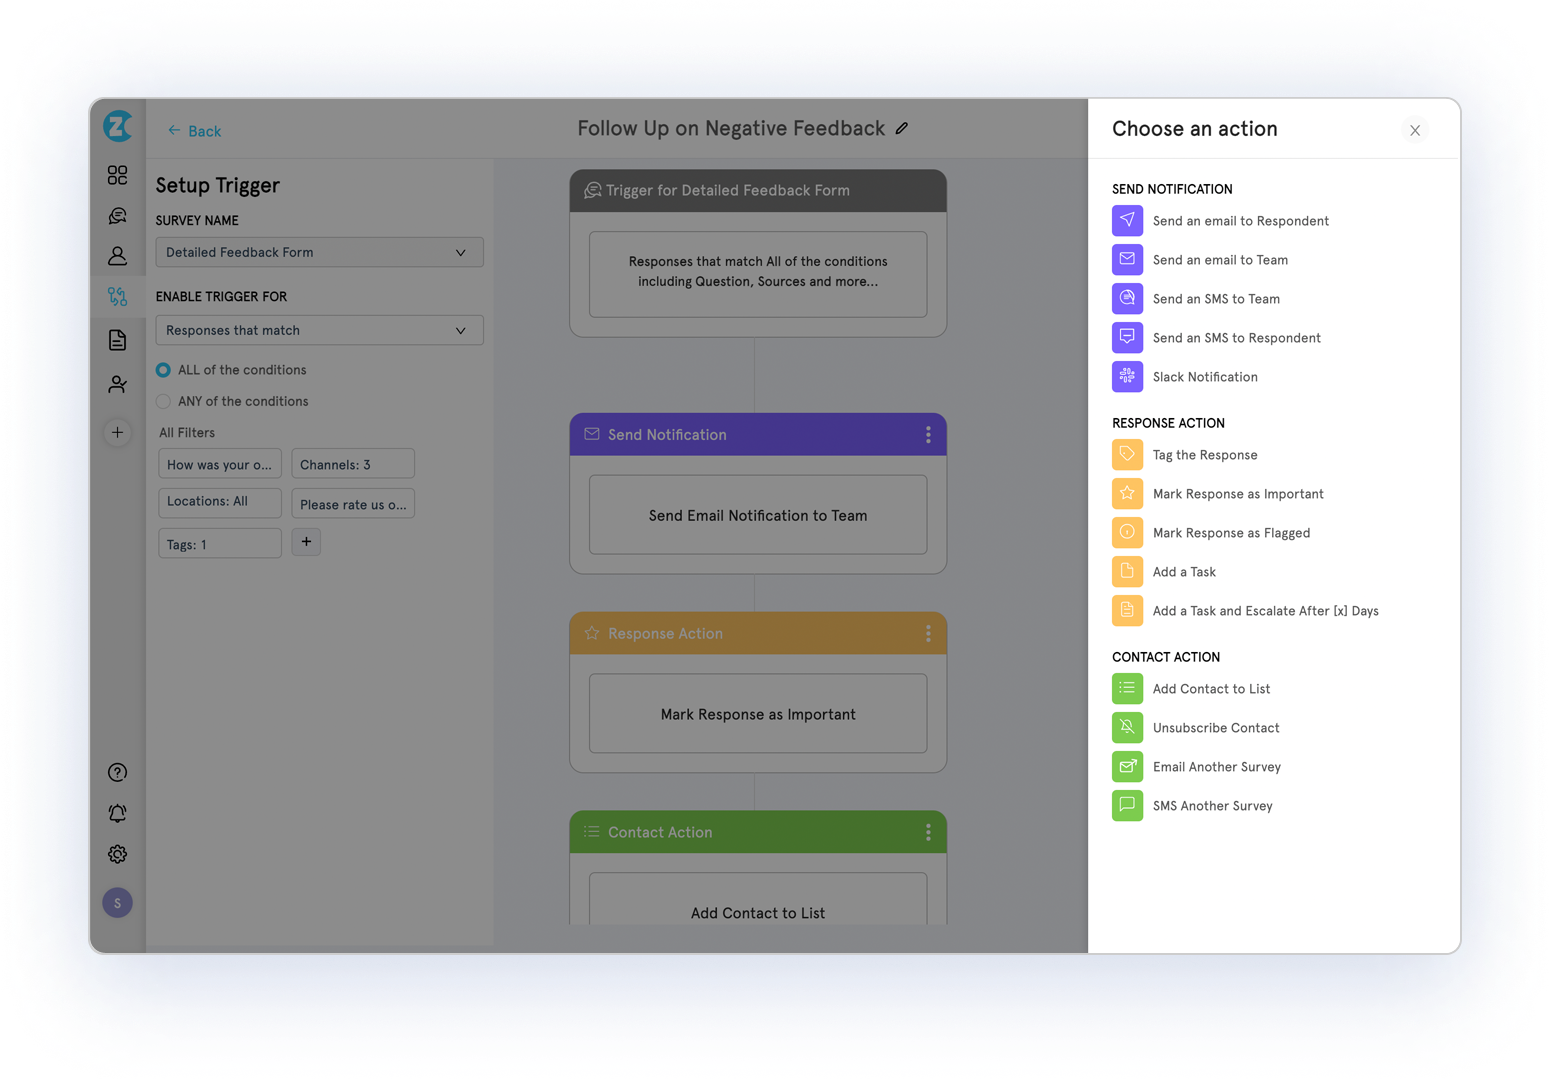 Workflows and Automation in a customer feedback tool